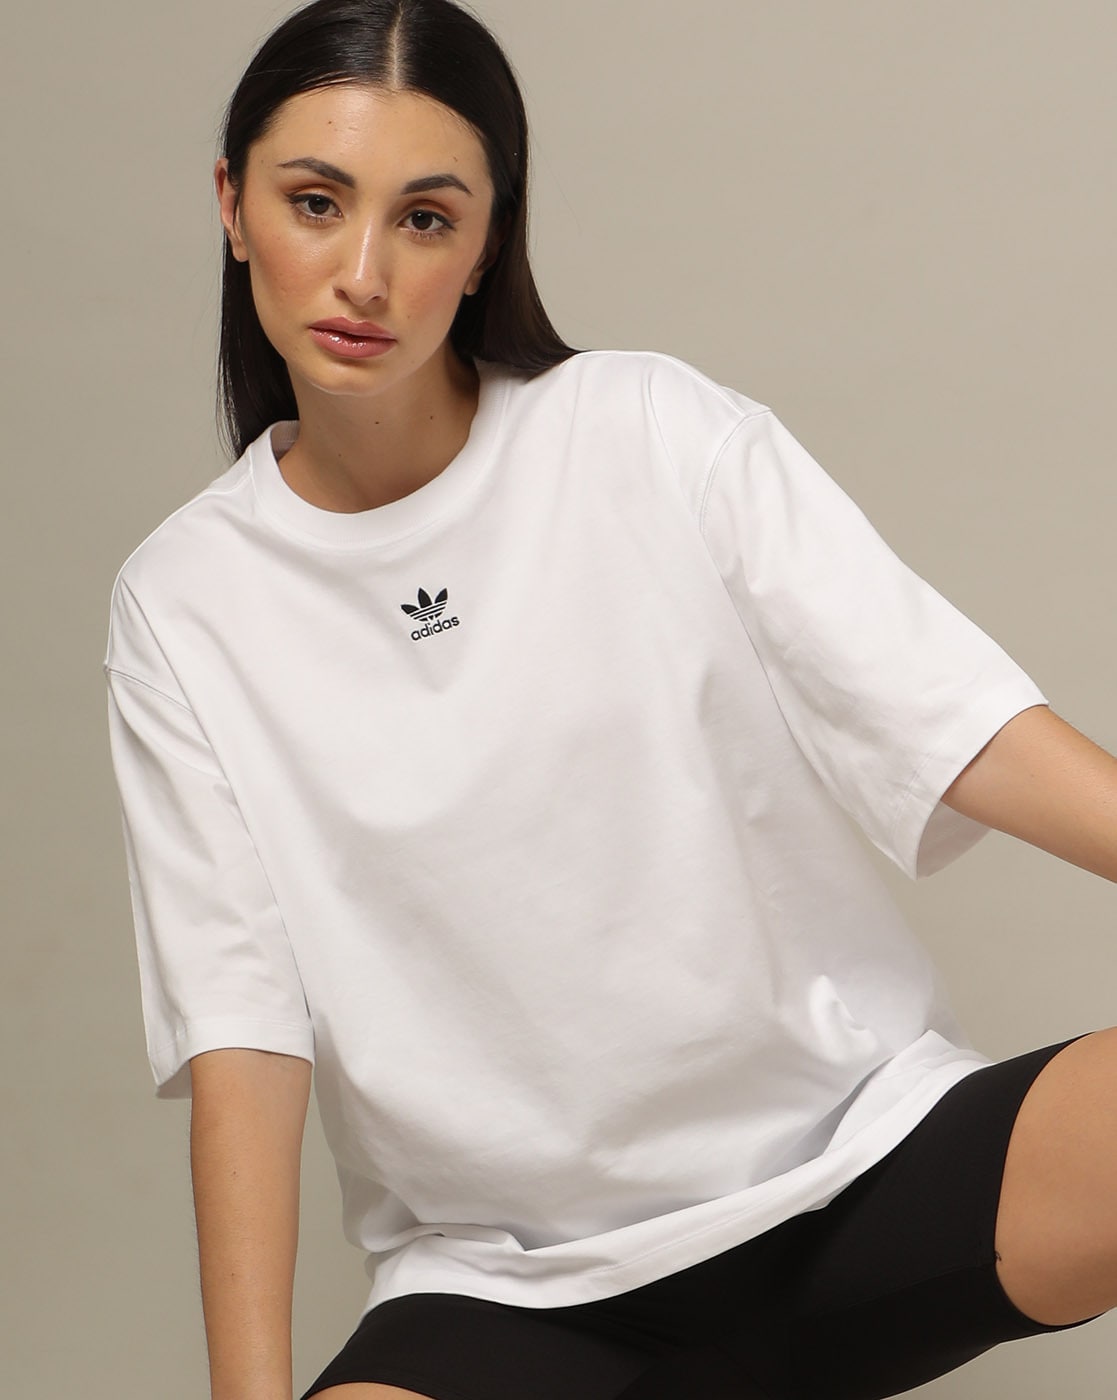 for Originals by Women Adidas Online Tshirts Buy White